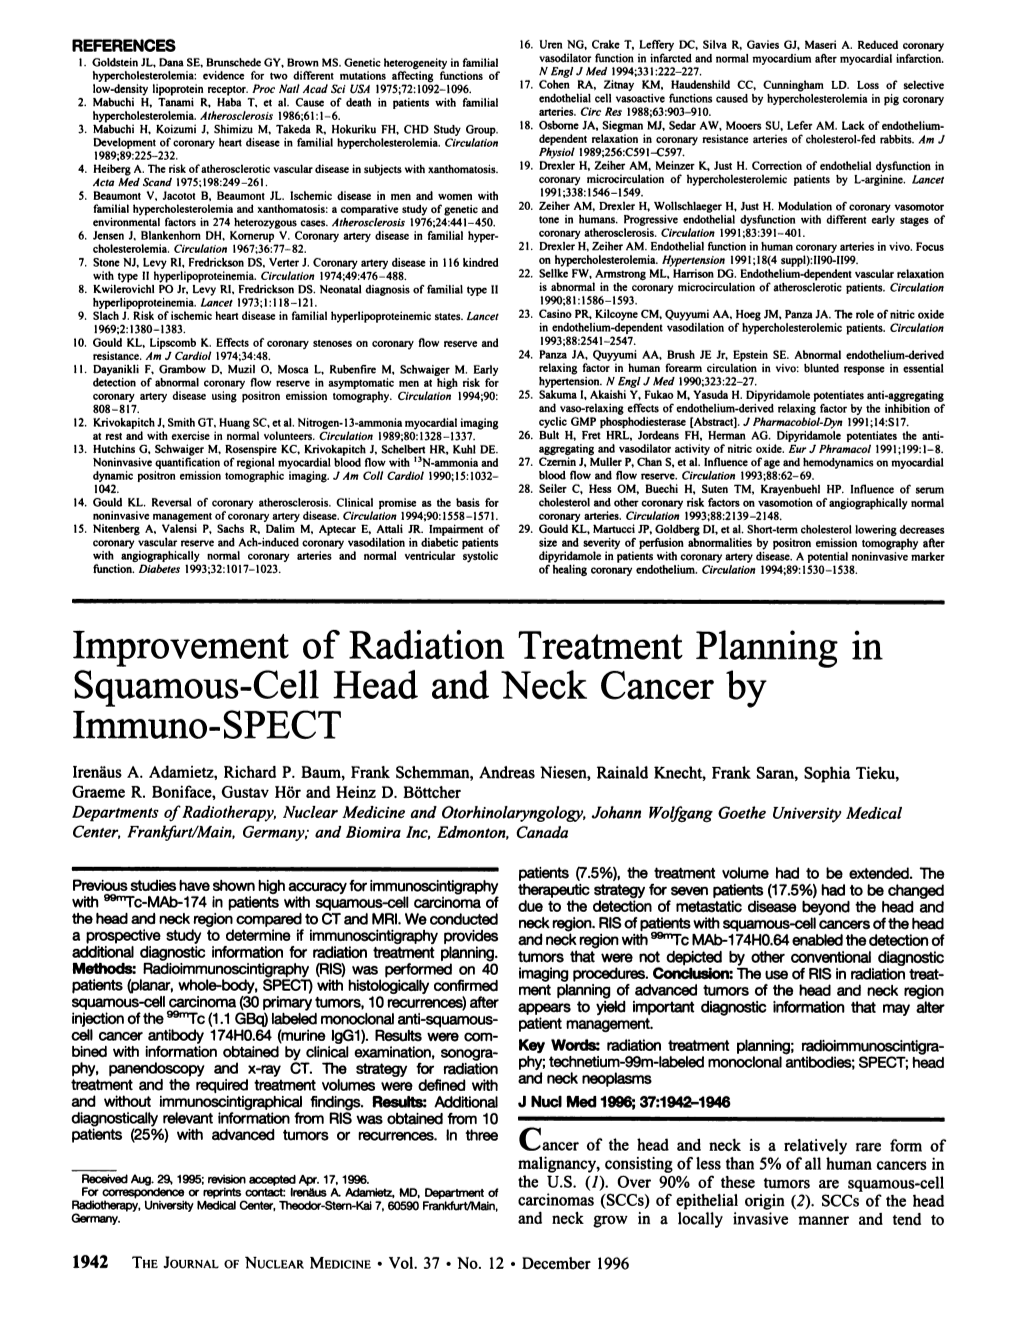 Improvement of Radiation Treatment Planning in Squamous-Cell Head and Neck Cancer by Immuno-SPECT